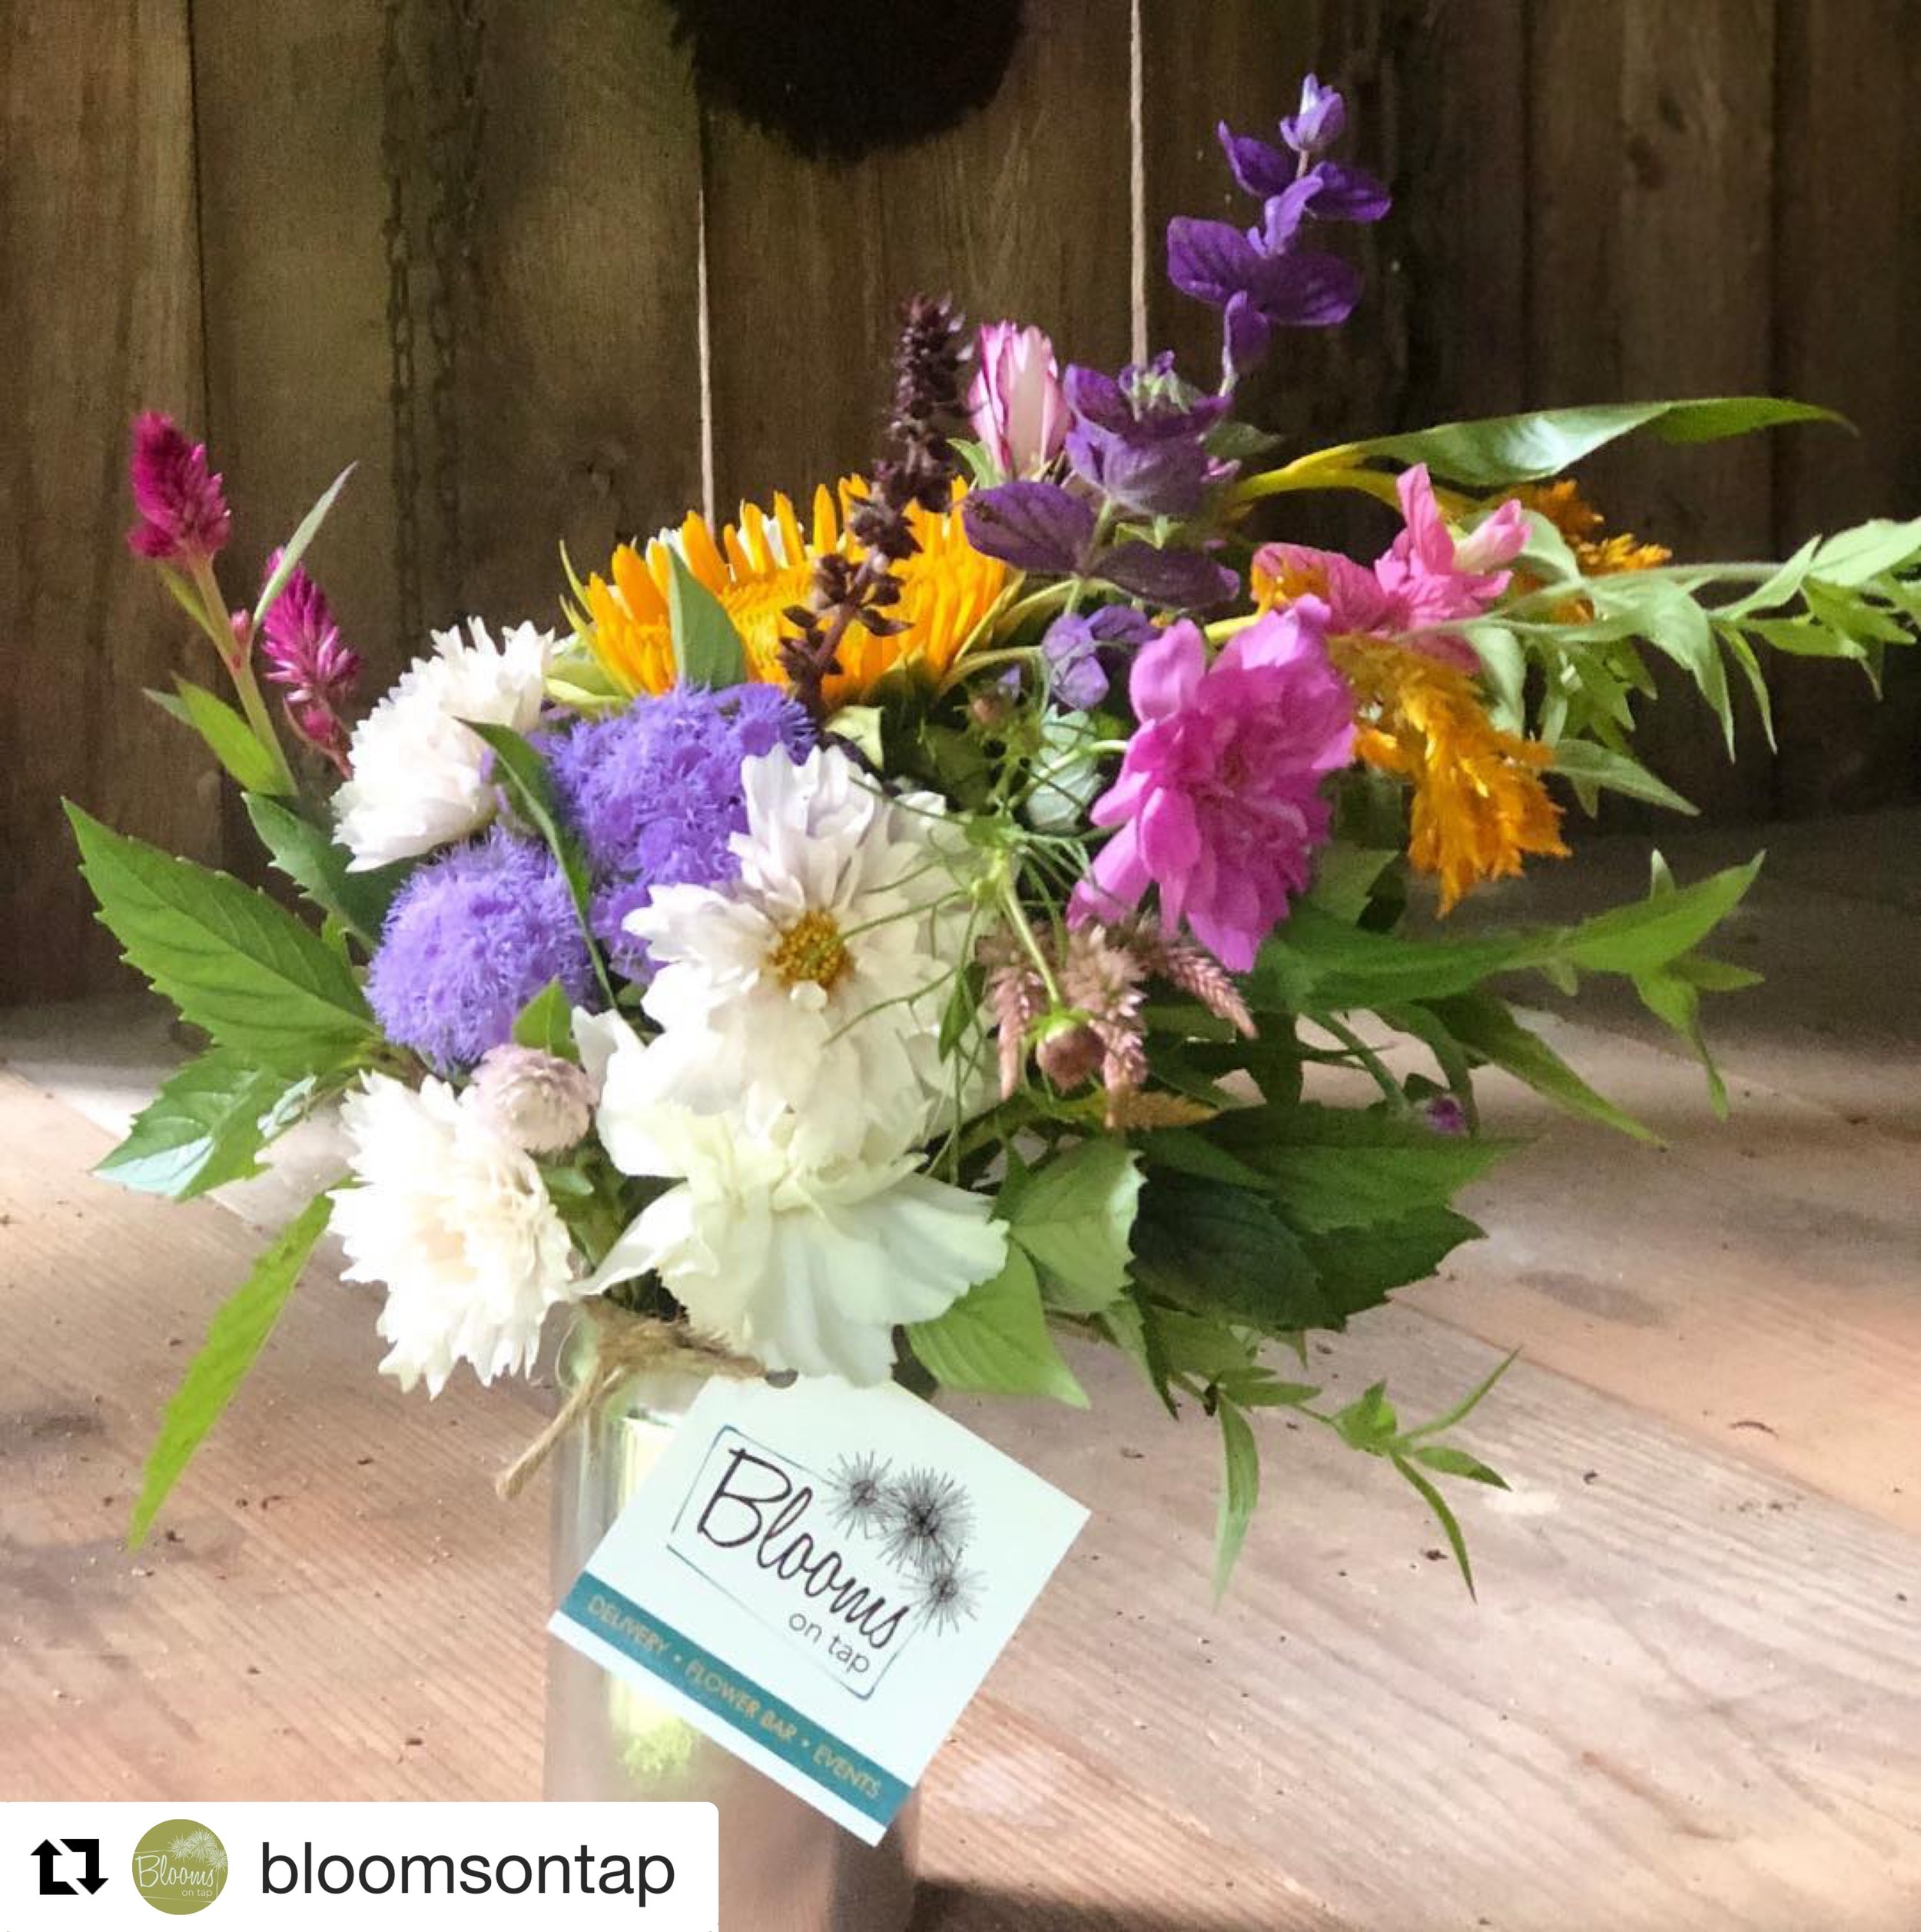 One of Bloom On Tap's bouquet of the Day